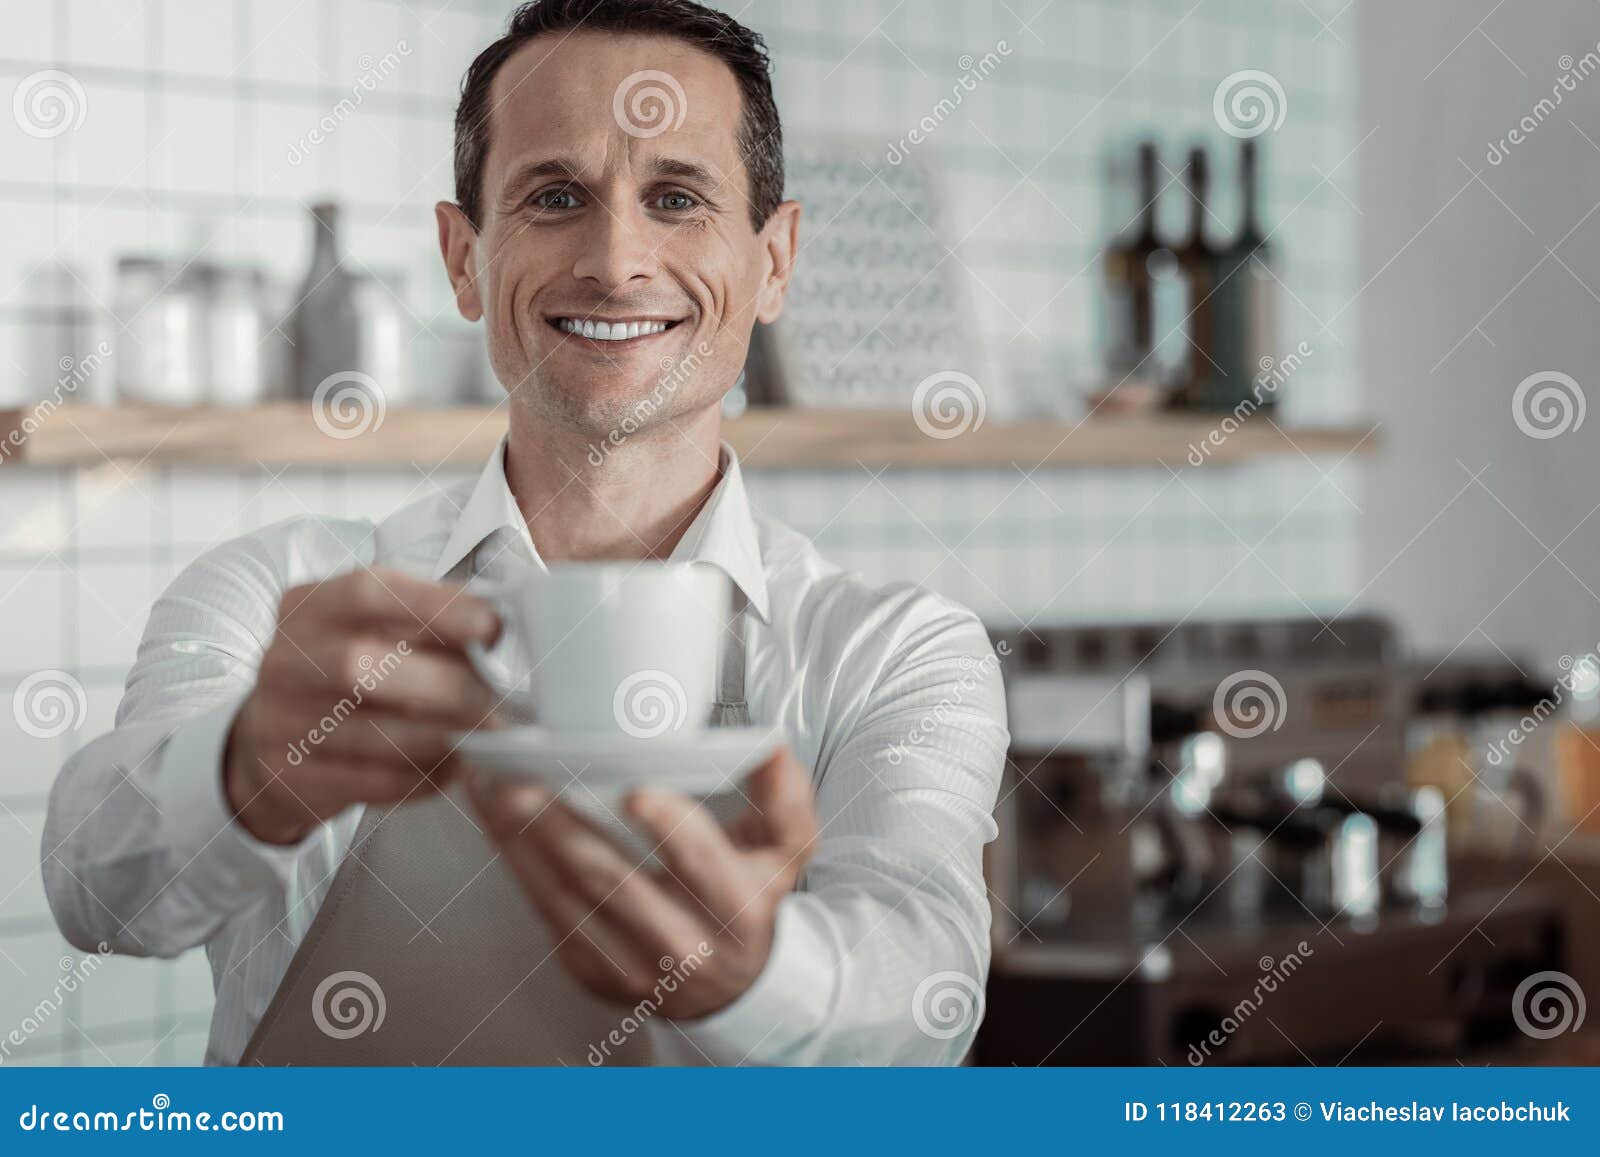 Delighted Owner Working in His Coffee Shop Stock Image - Image of ...